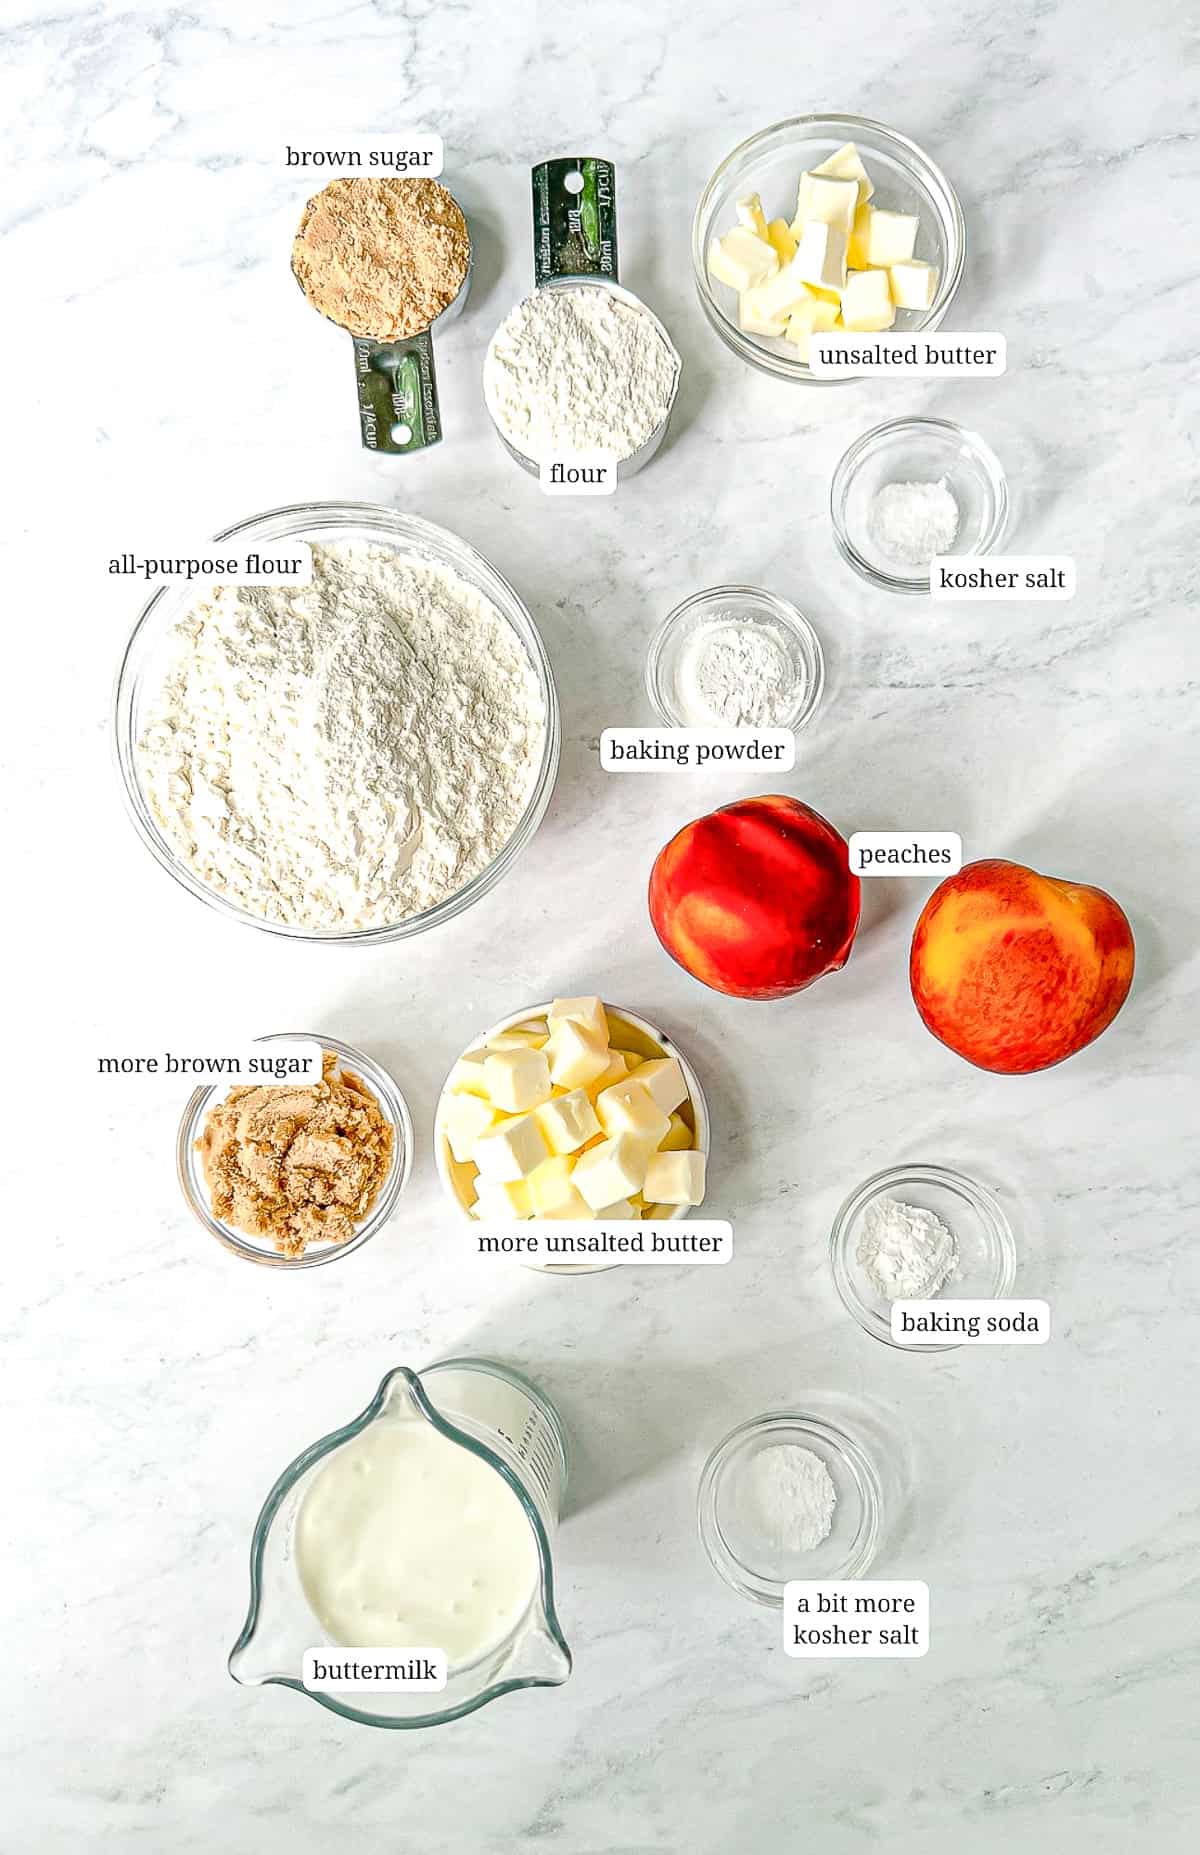 Labeled image of ingredients needed to make peach biscuits.